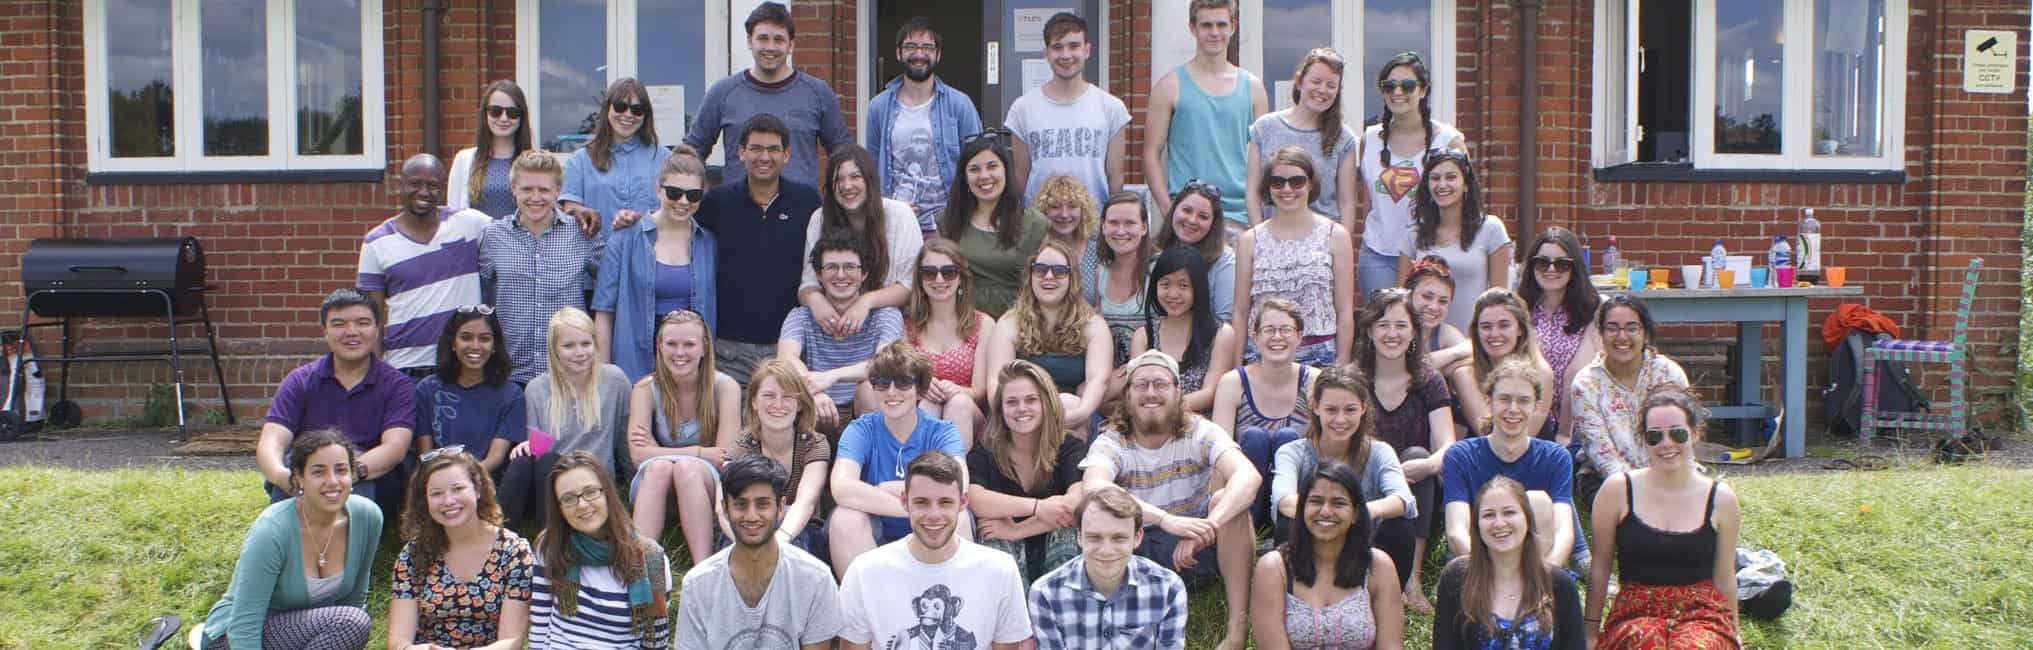 Student volunteers and staff at Hogacre Common, Oxford, in summer 2014.